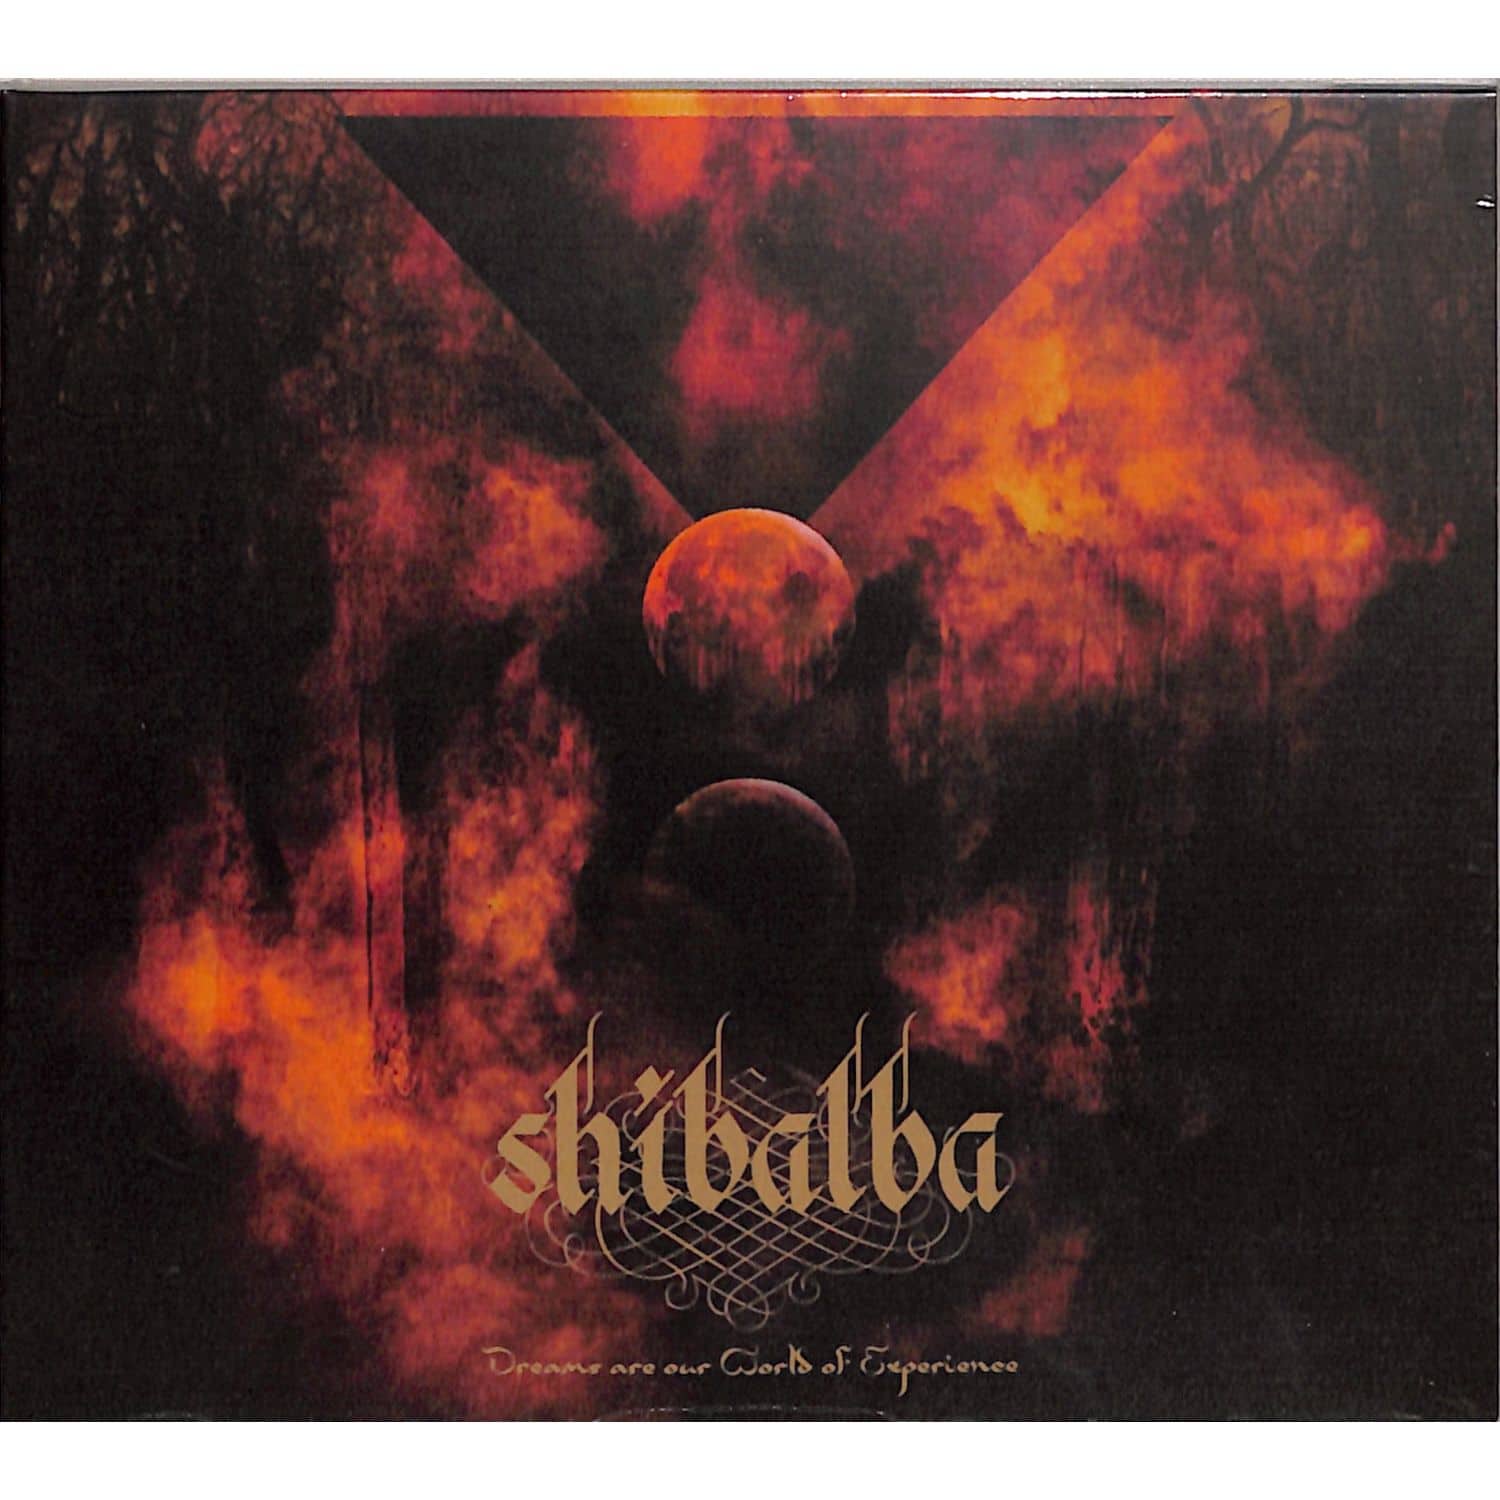 Shibalba - DREAMS ARE OUR WORLD OF EXPERIENCE 